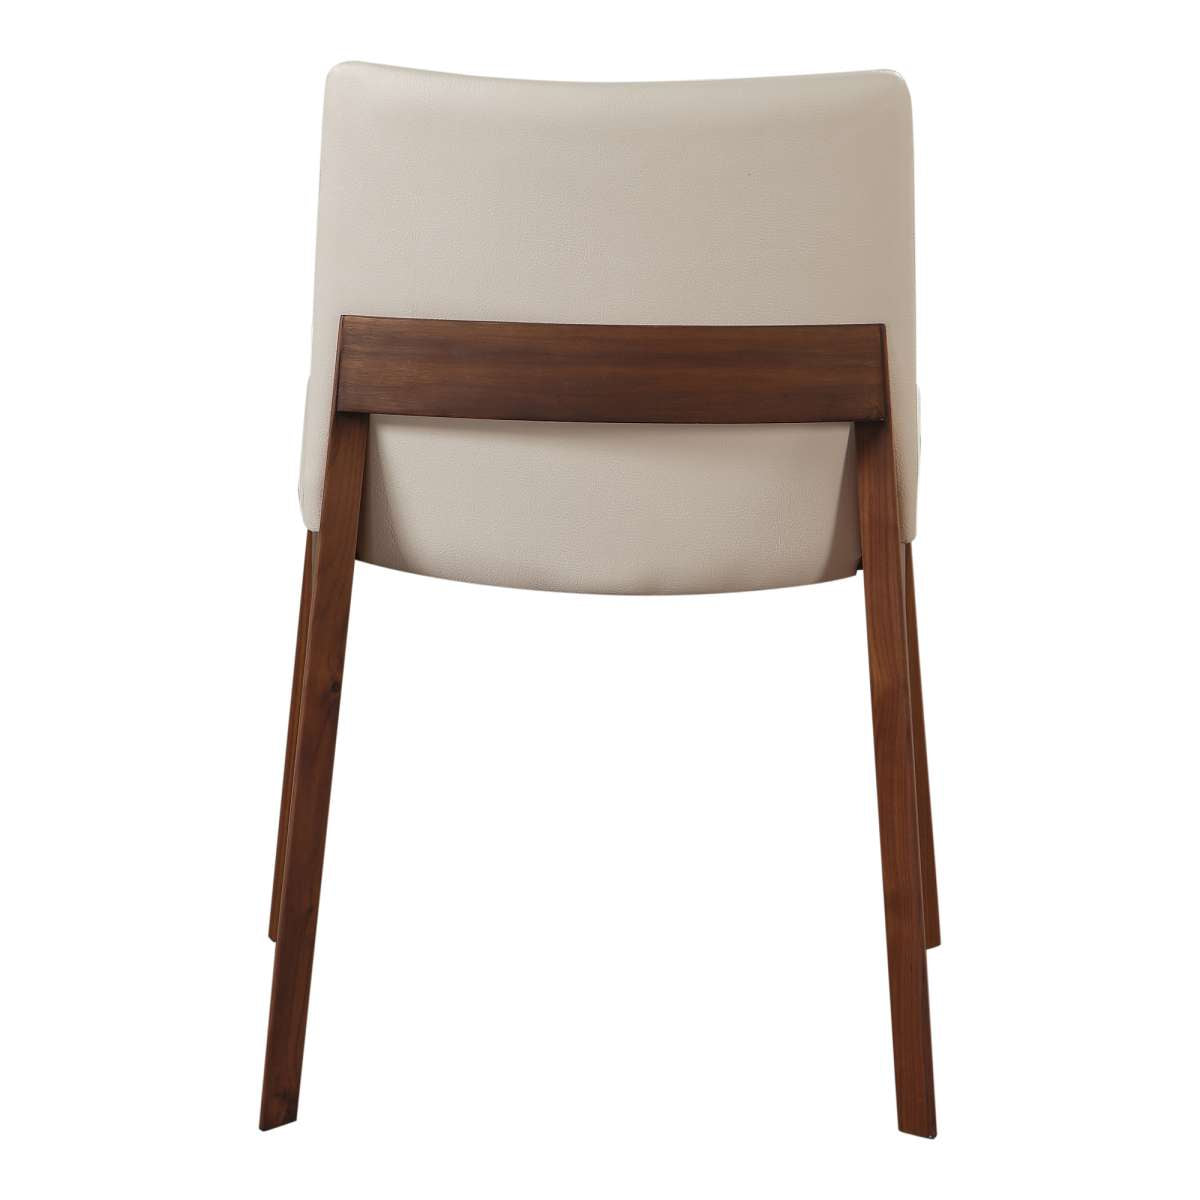 Deco Dining Chair - Set Of 2 By Moe's Home Collection